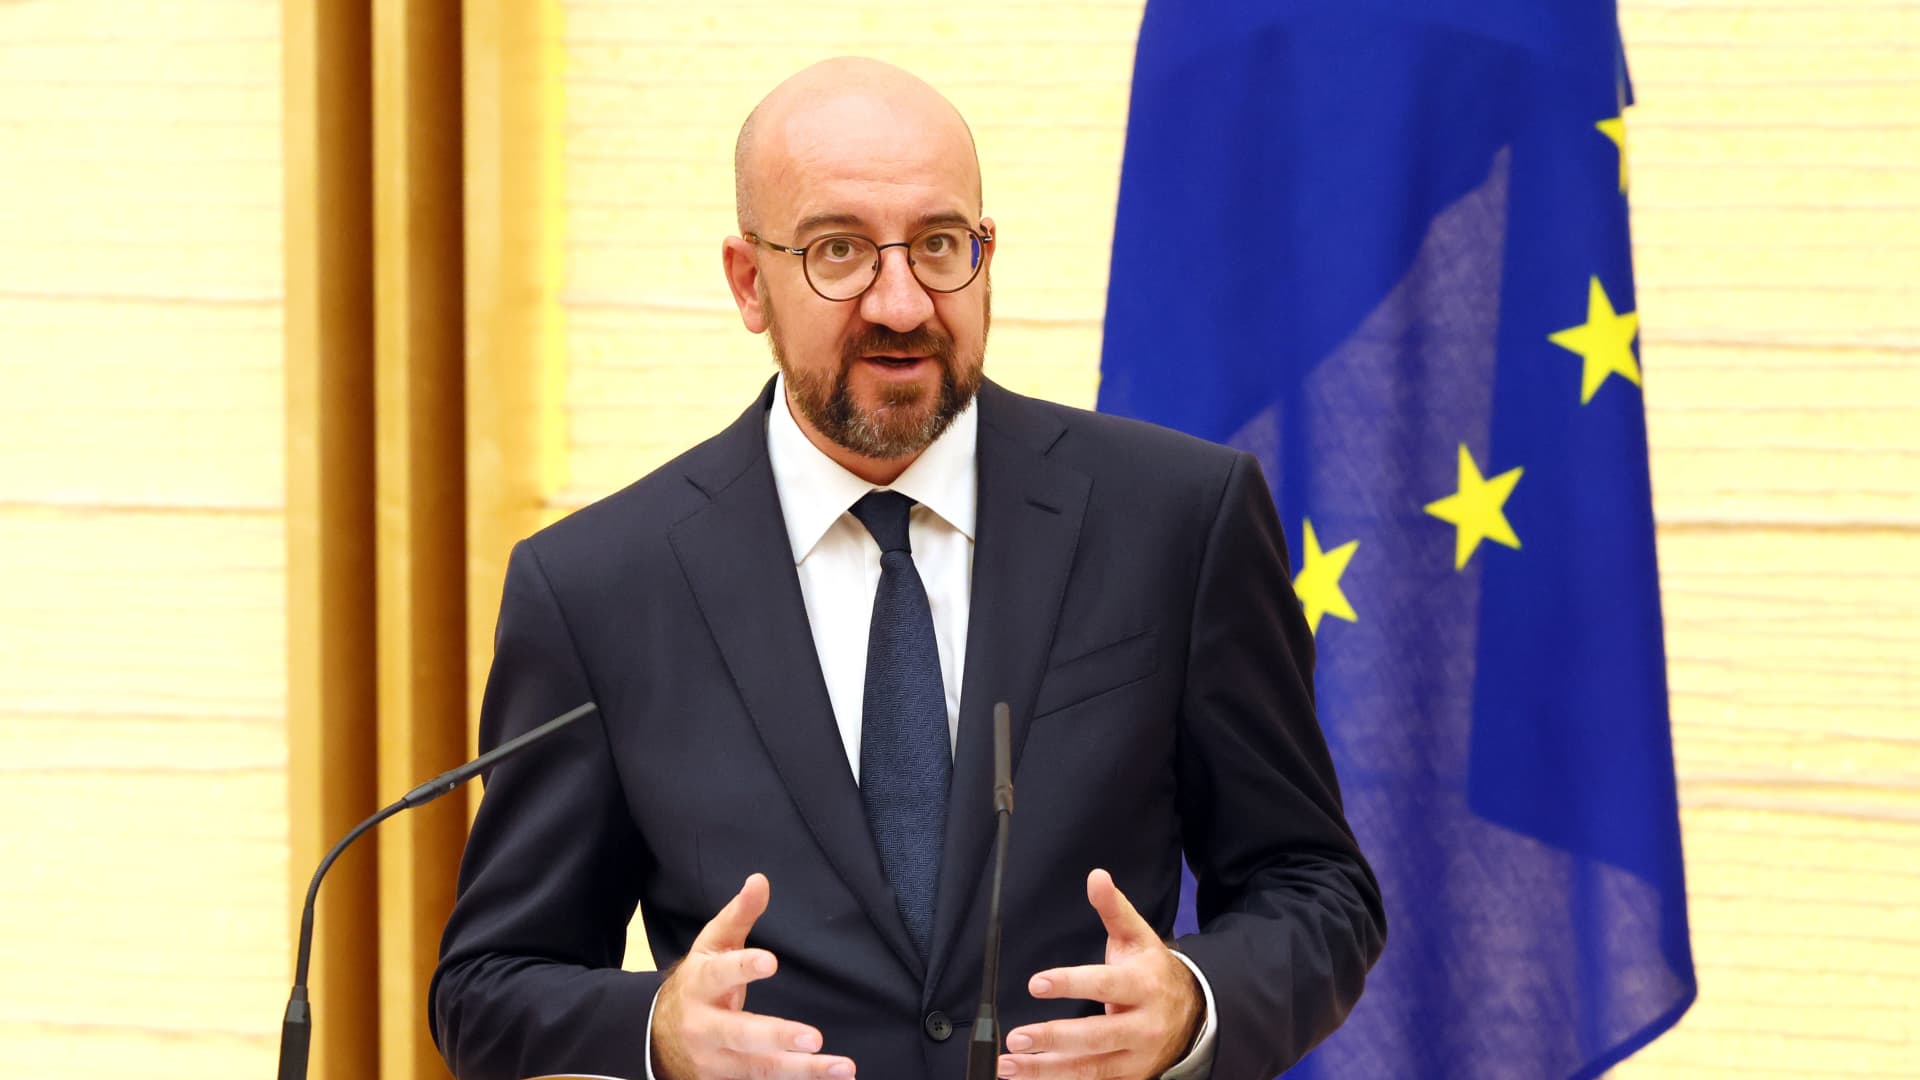 European Council President Charles Michel talks during the joint press conference with European Commission President Ursula von der Leyen and Japanese Prime Minister Fumio Kishida following their meeting at the prime minister's office on May 12, 2022 in Tokyo, Japan.